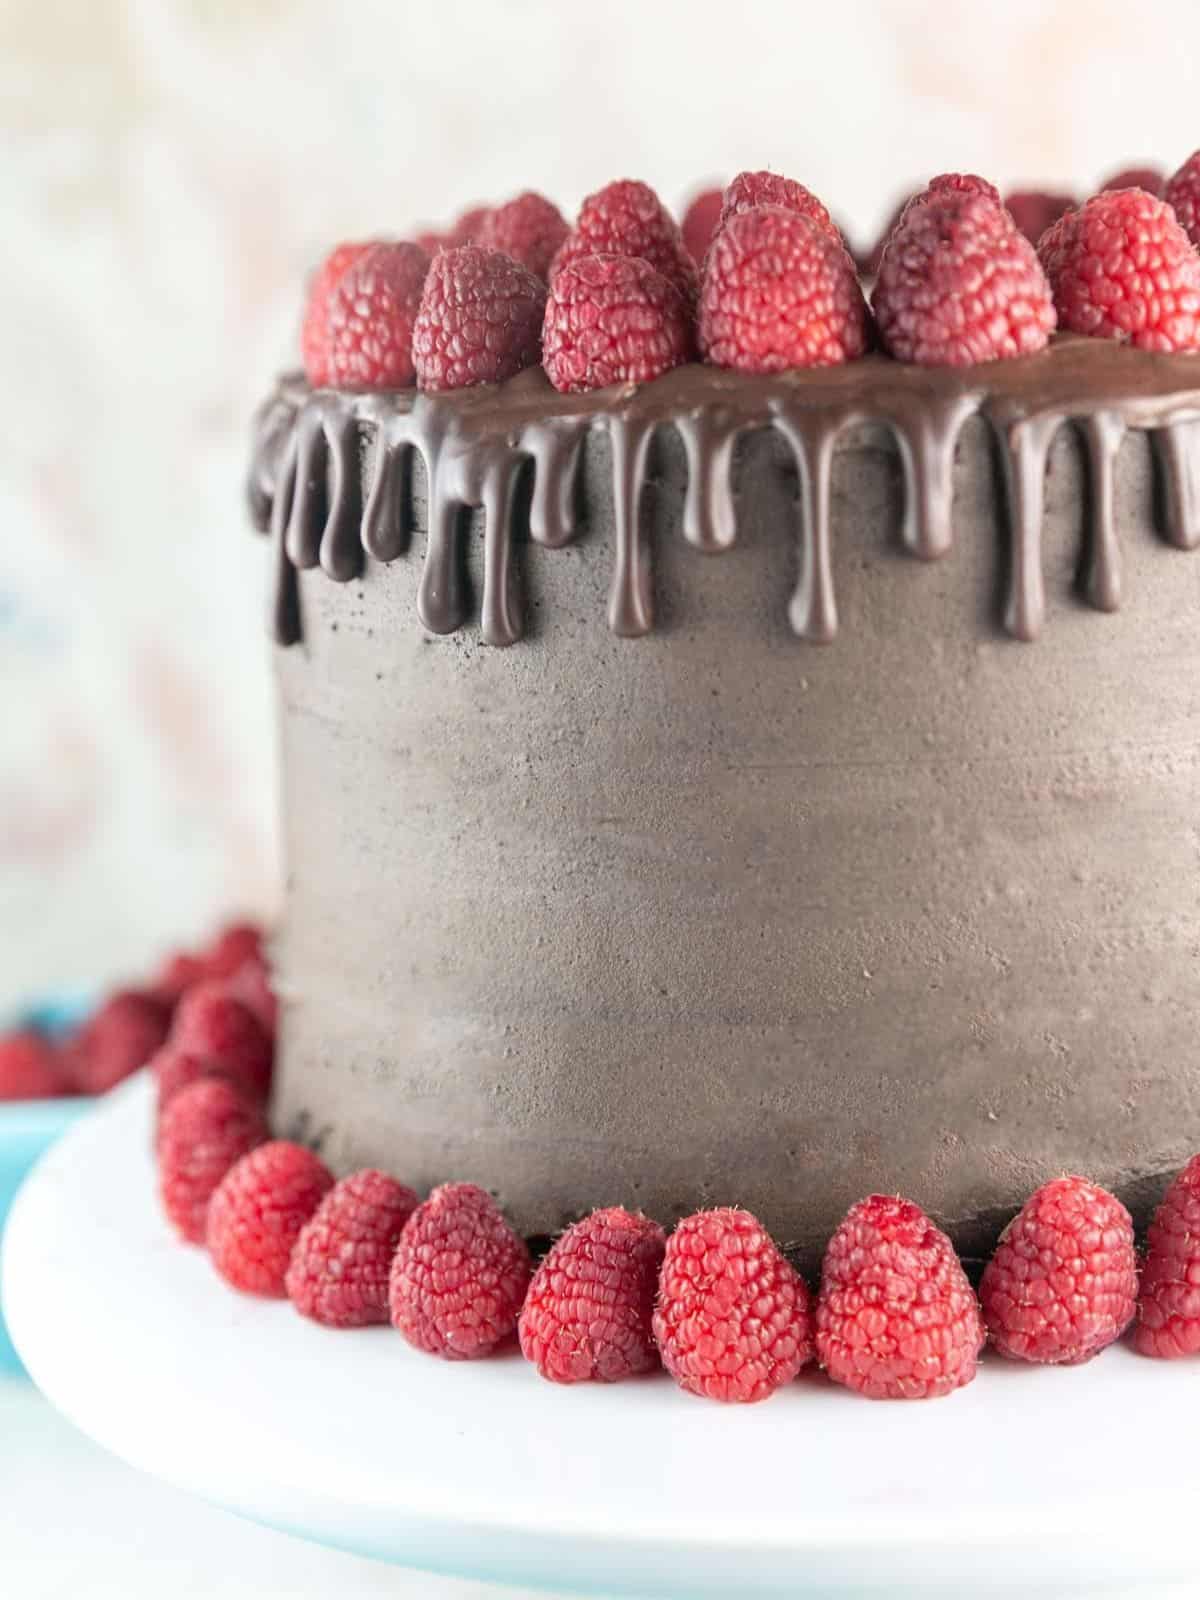 Layers of Chocolate Cake encased in Chocolate Buttercream with dripped Chocolate Ganache and Fresh Raspberries